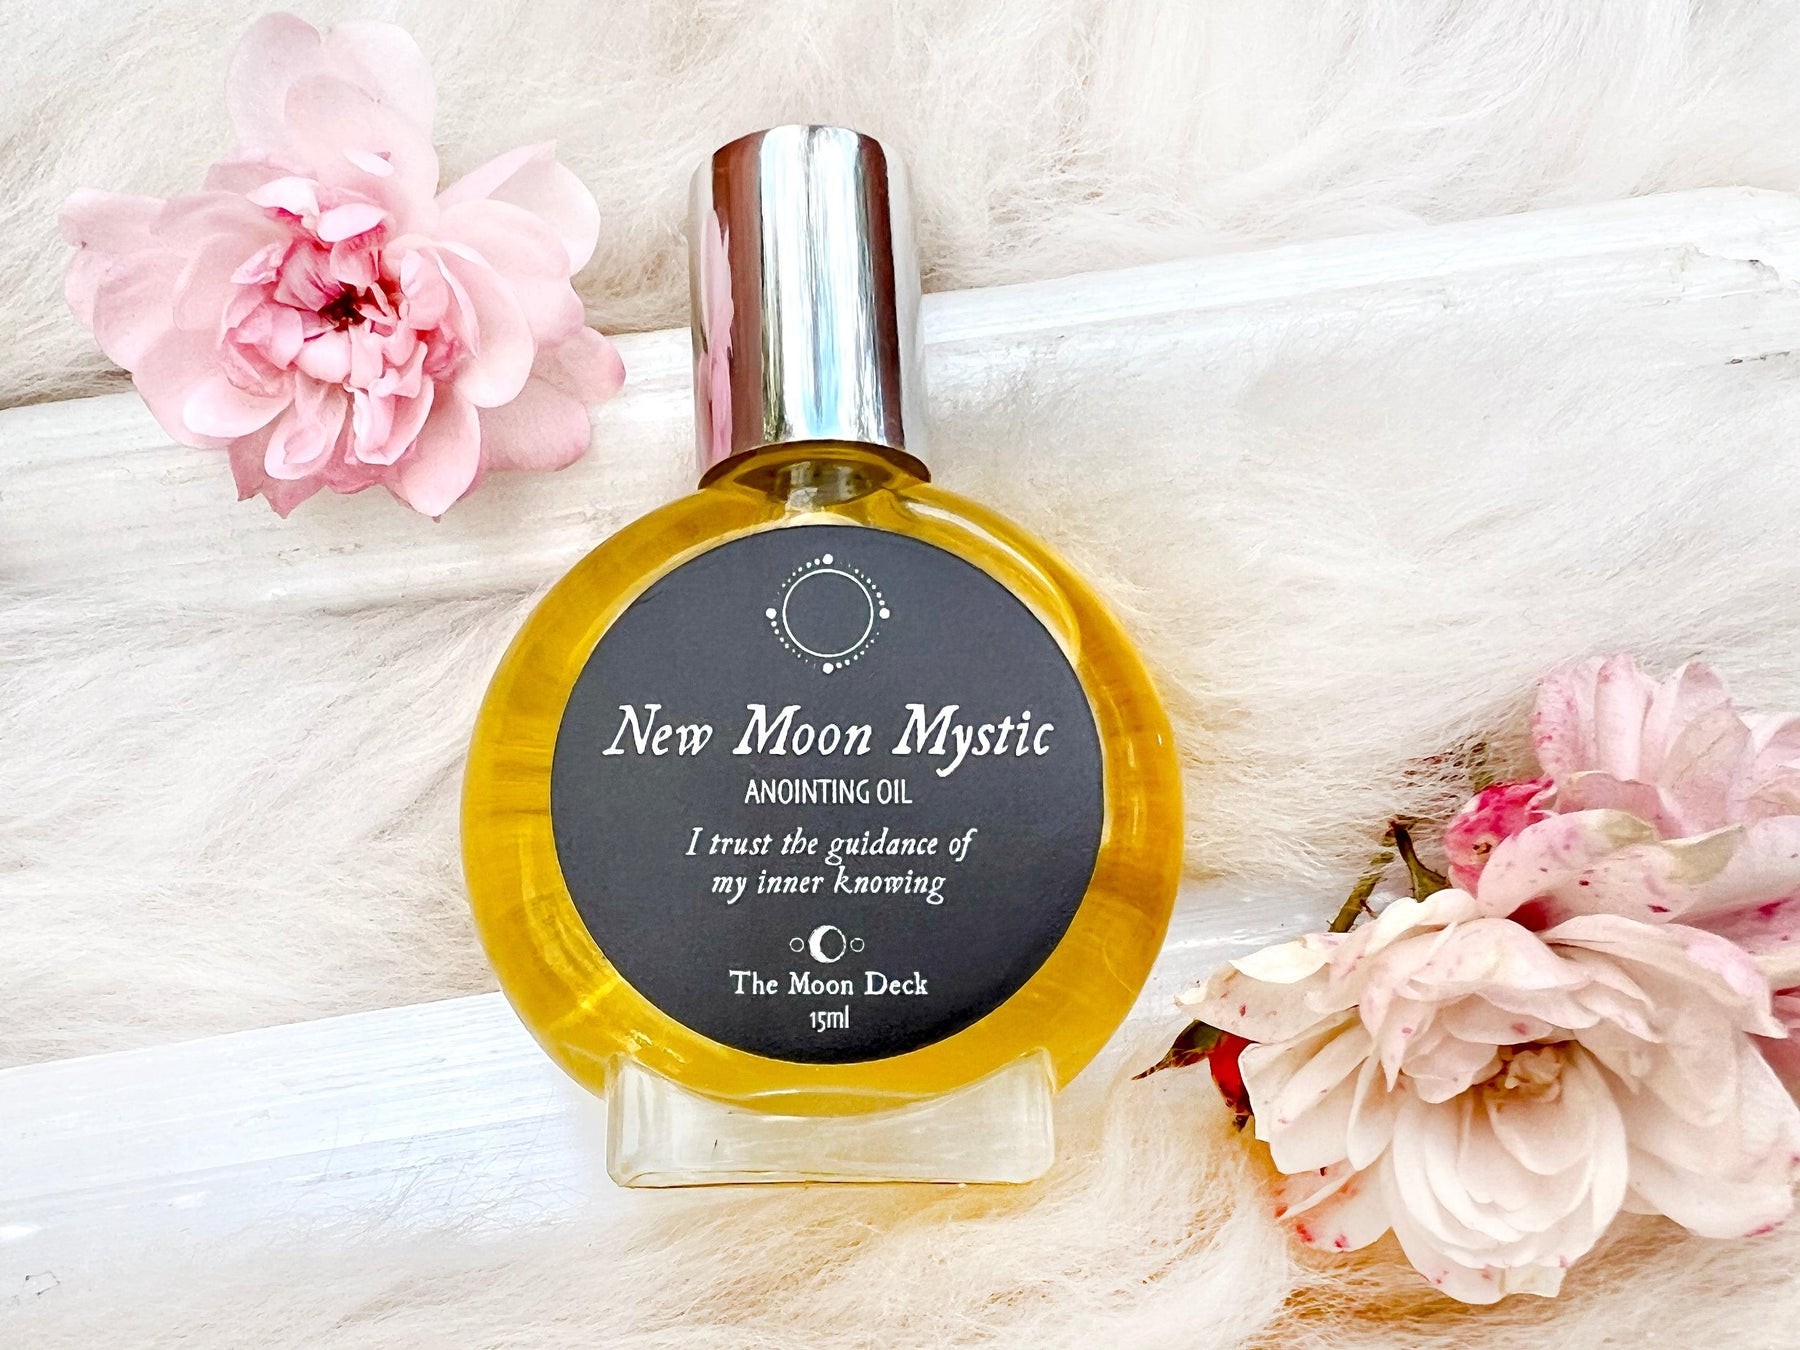 NEW MOON MYSTIC ANOINTING OIL